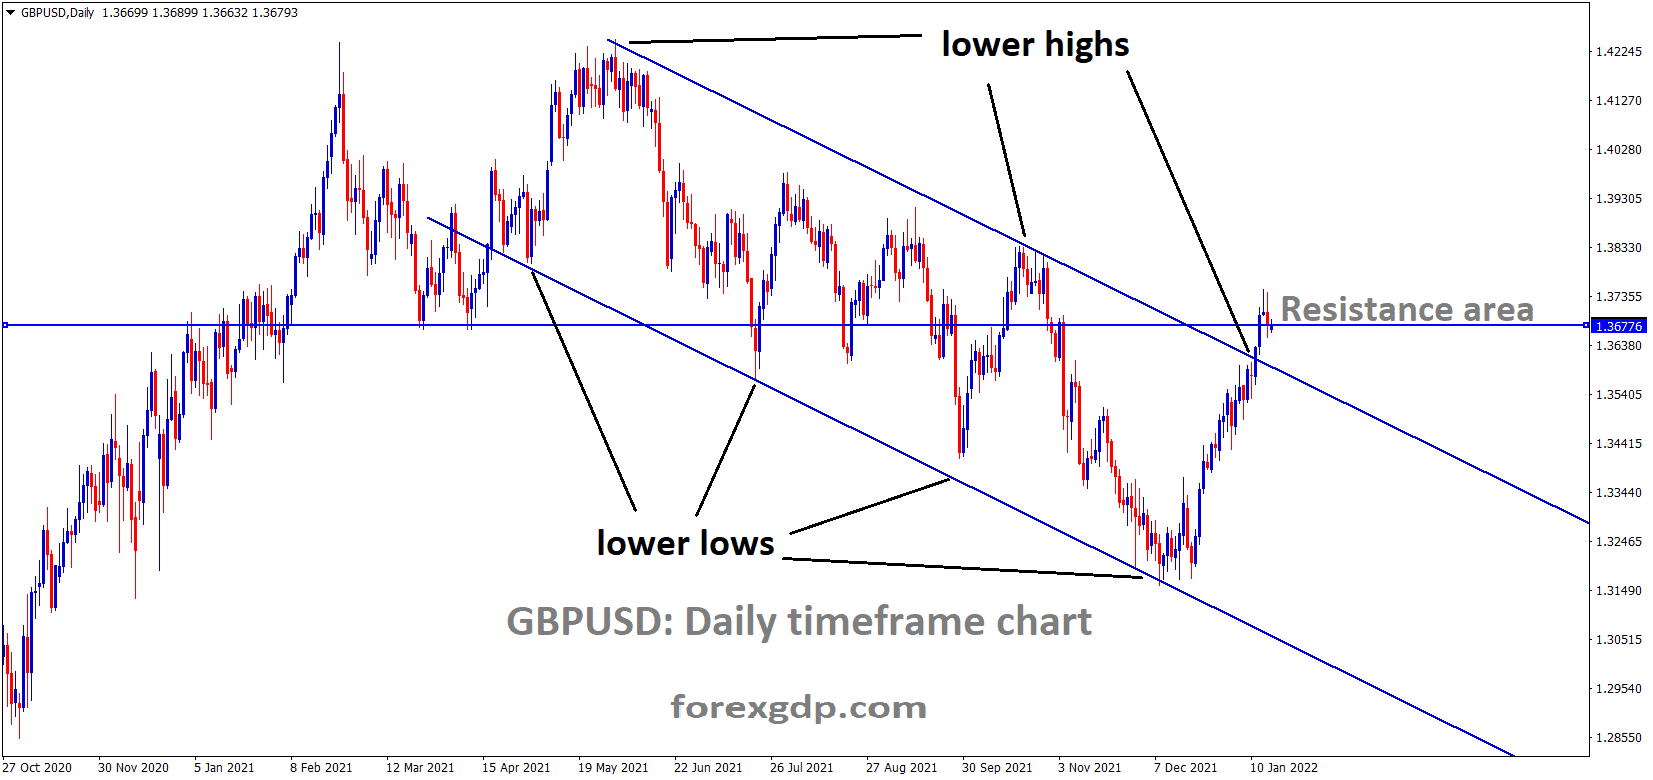 GBPUSD has broken the Descending channel and the market has reached the Horizontal resistance areas 1